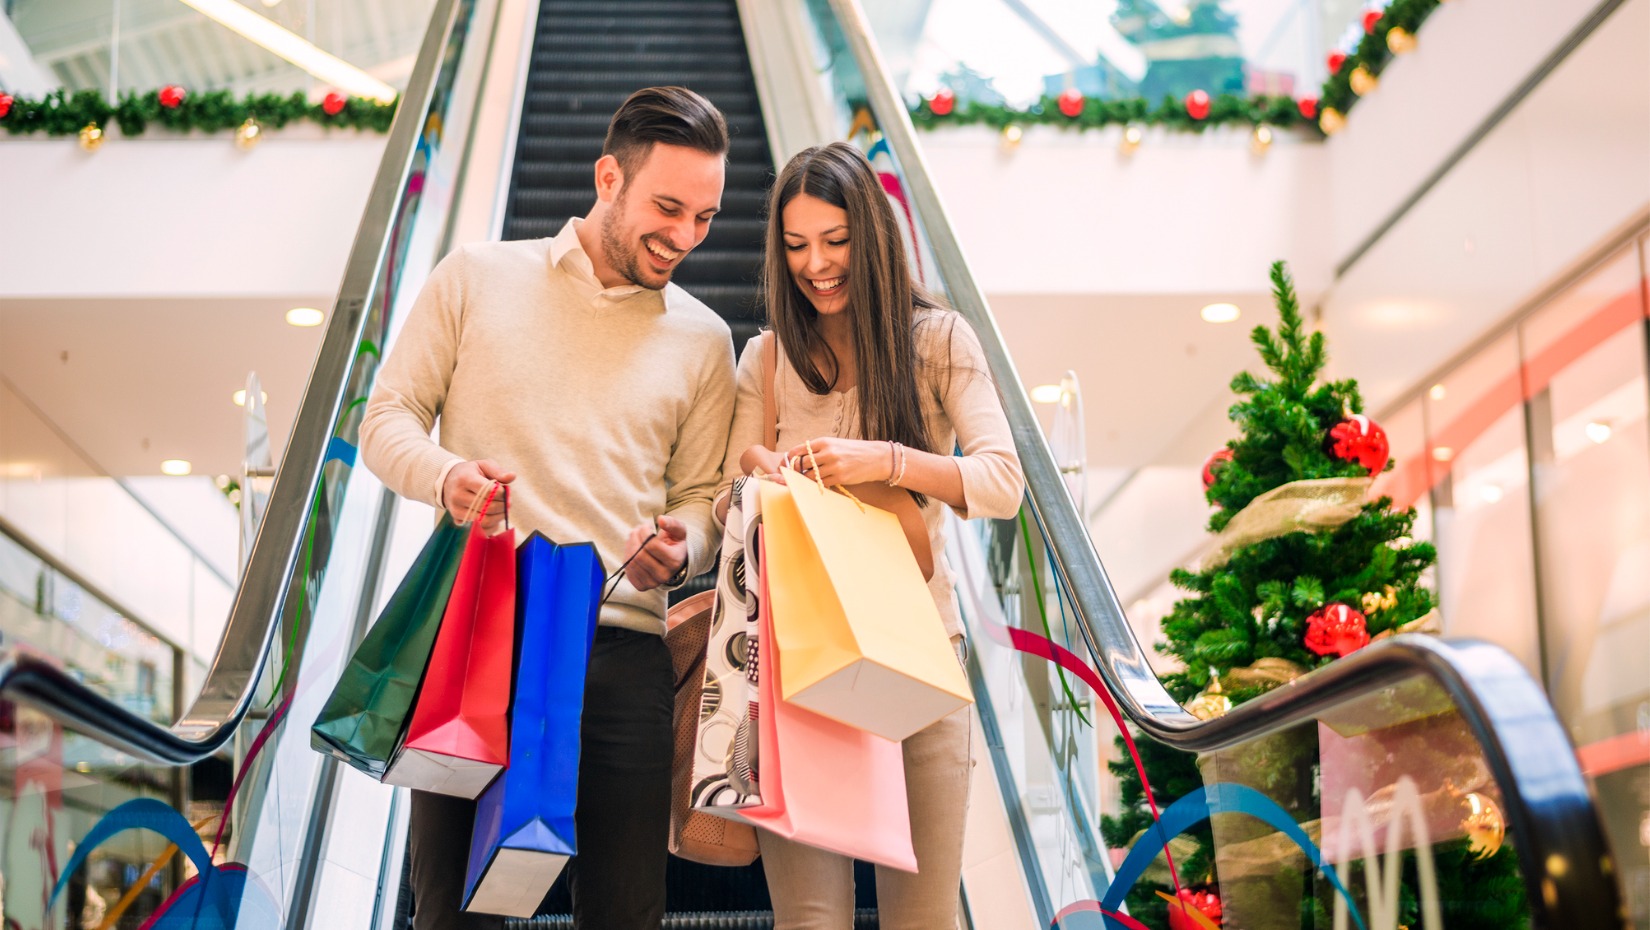 loving-couple-doing-christmas-shopping-together-picture-id500110954